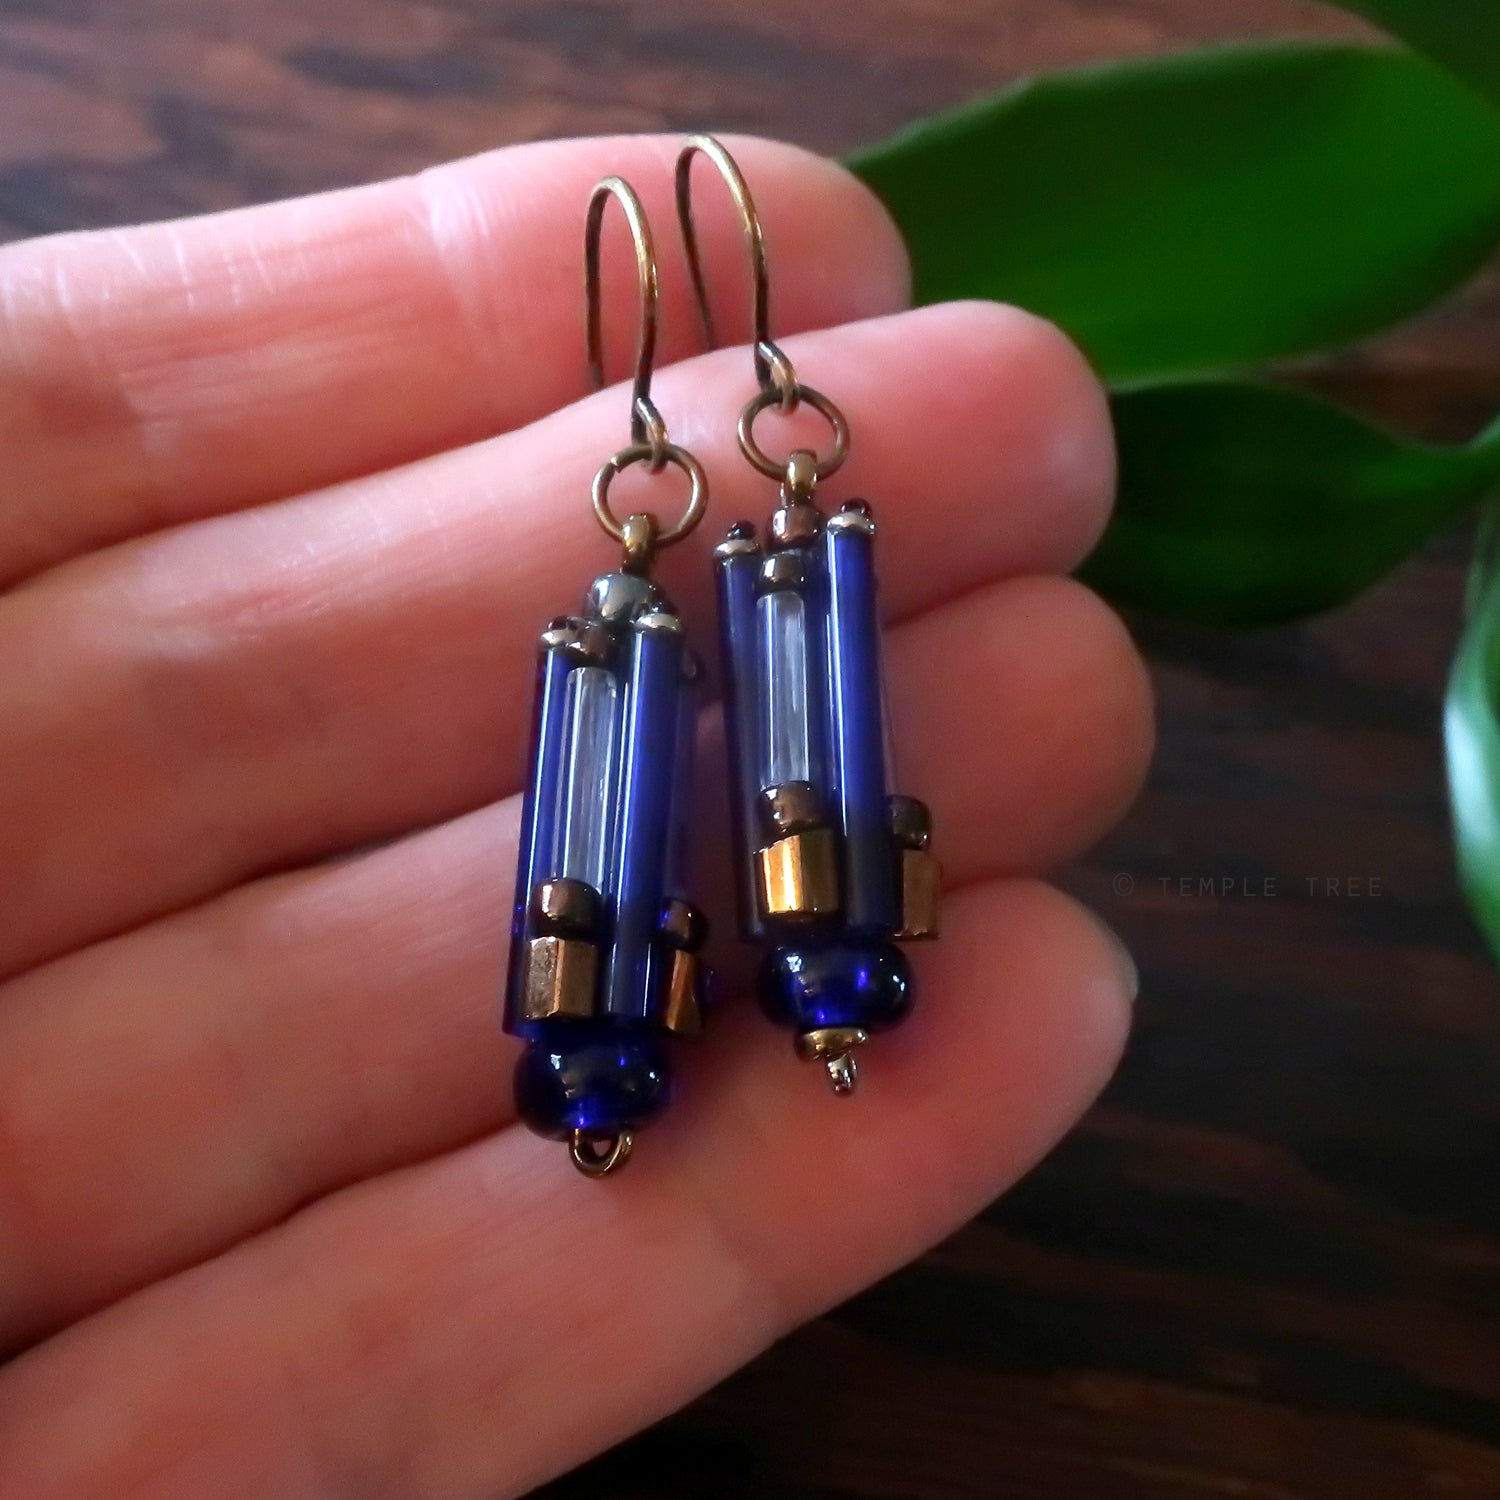 City Circuits - Ancient Fuse Box Earrings by Temple Tree - Cobalt Bronze